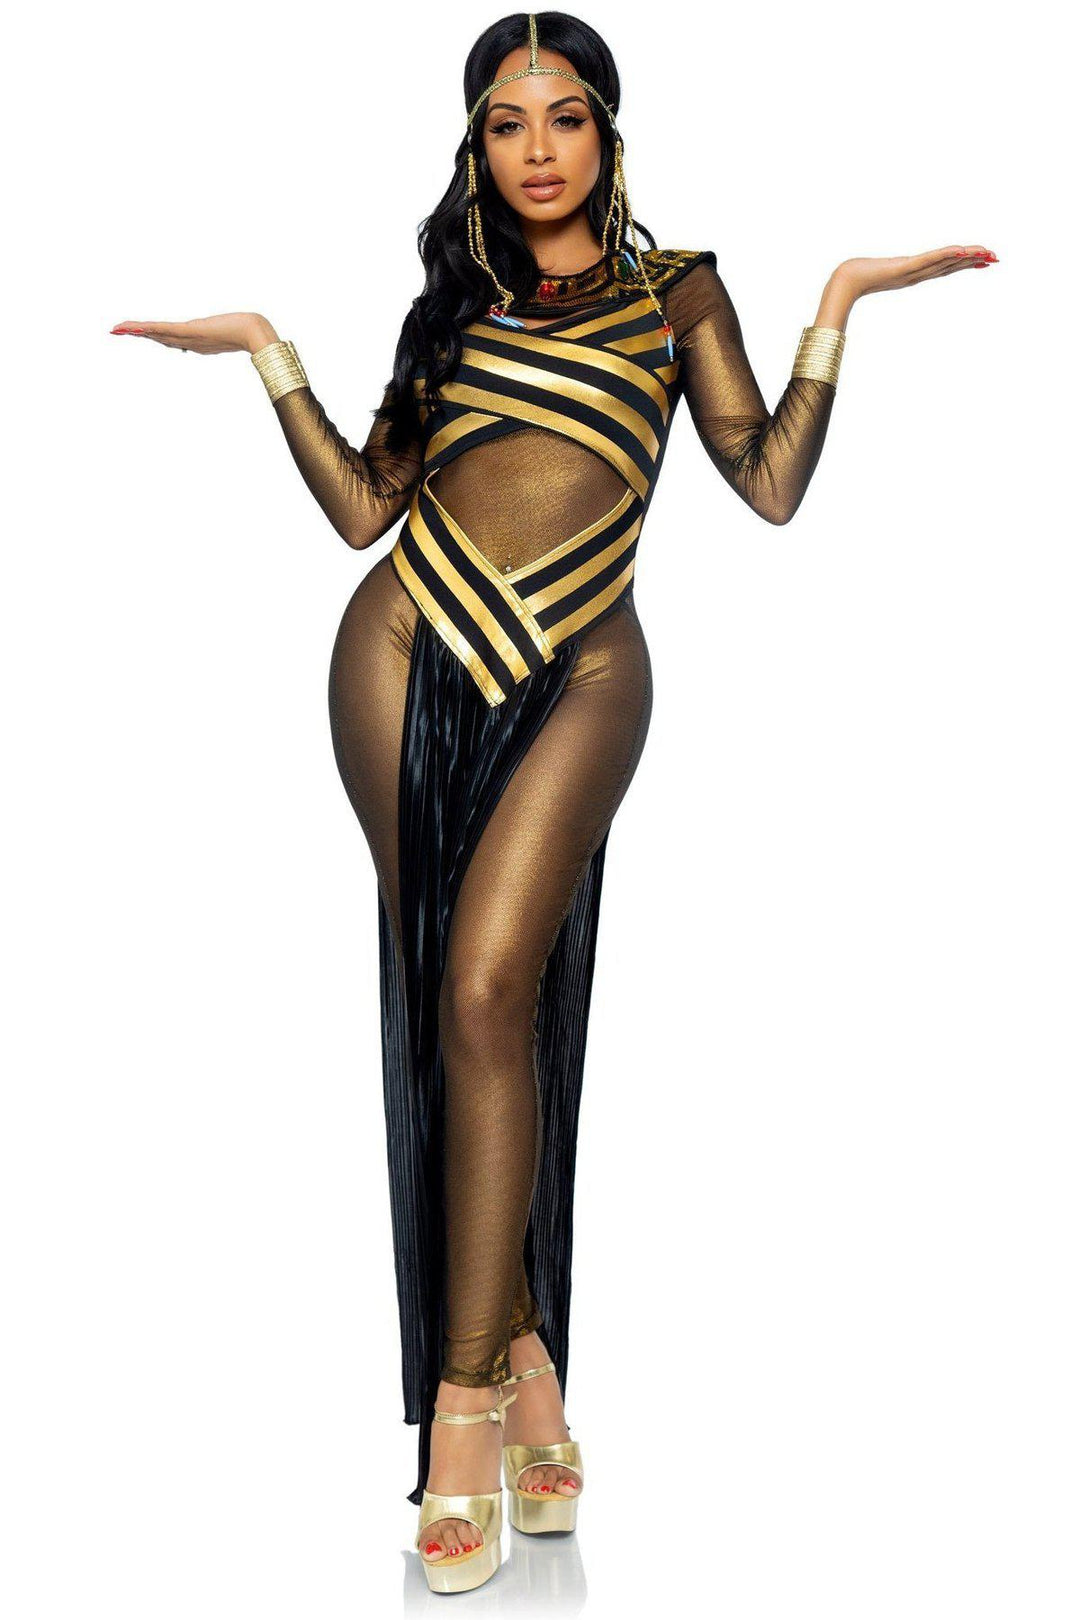 Nile Queen Catsuit Costume-Goddess Costumes-Leg Avenue-SEXYSHOES.COM